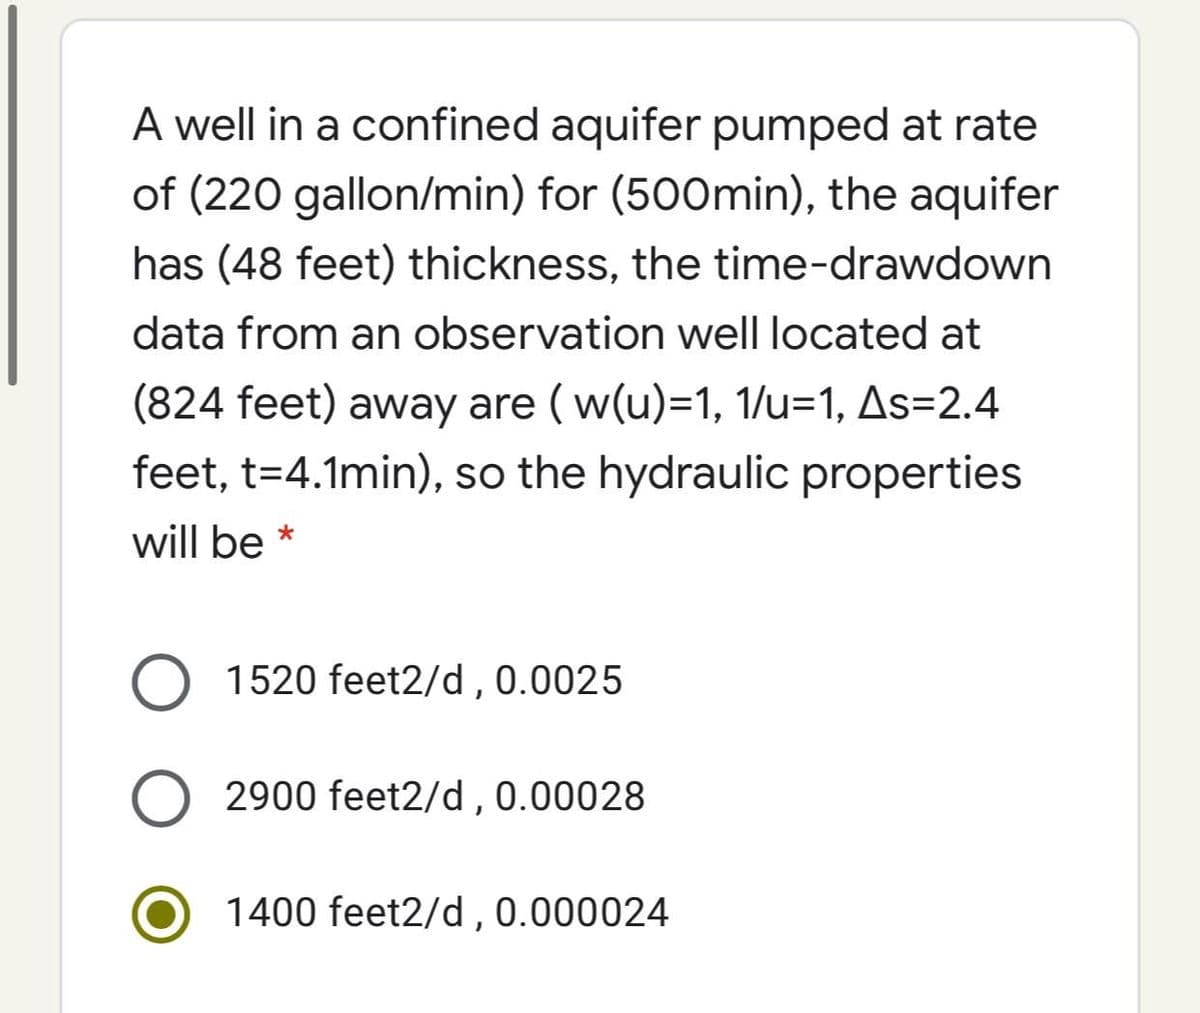 A well in a confined aquifer pumped at rate
of (220 gallon/min) for (500min), the aquifer
has (48 feet) thickness, the time-drawdown
data from an observation well located at
(824 feet) away are (w(u)=1, 1/u=1, As=2.4
feet, t=4.1min), so the hydraulic properties
will be *
O 1520 feet2/d , 0.0025
O 2900 feet2/d , 0.00028
1400 feet2/d,0.000024
